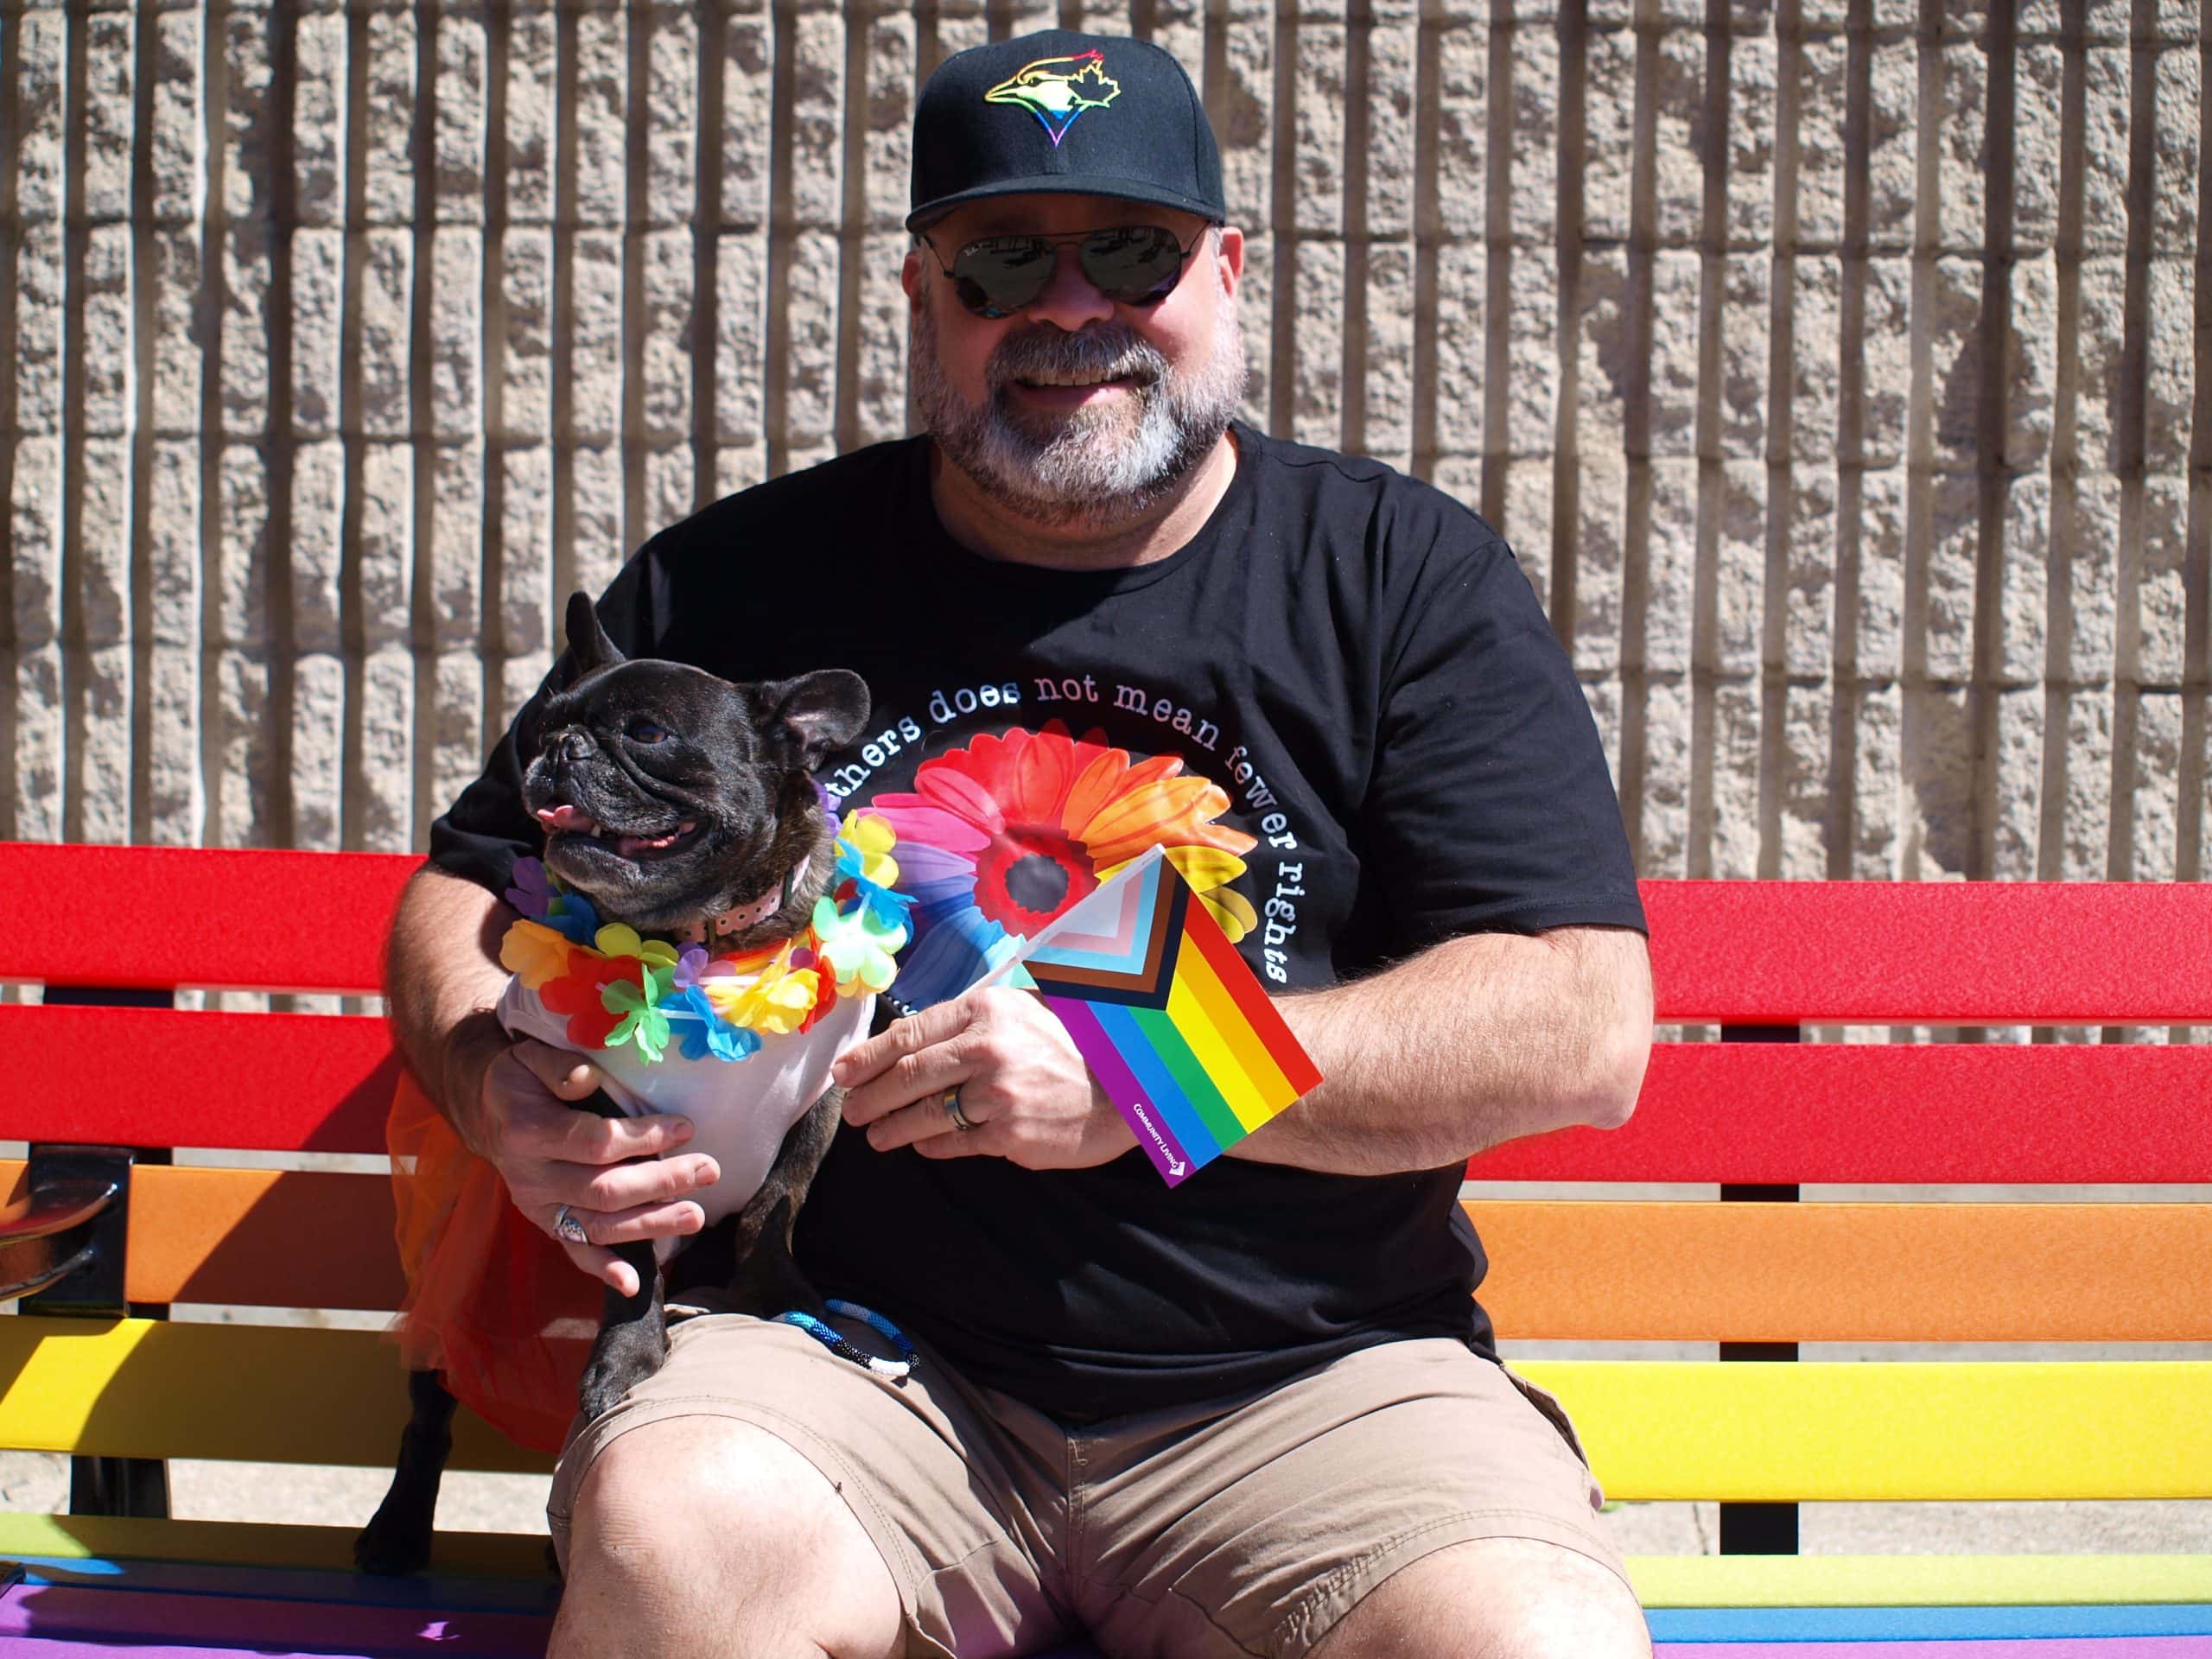 Man sitting on Pride bench with dog